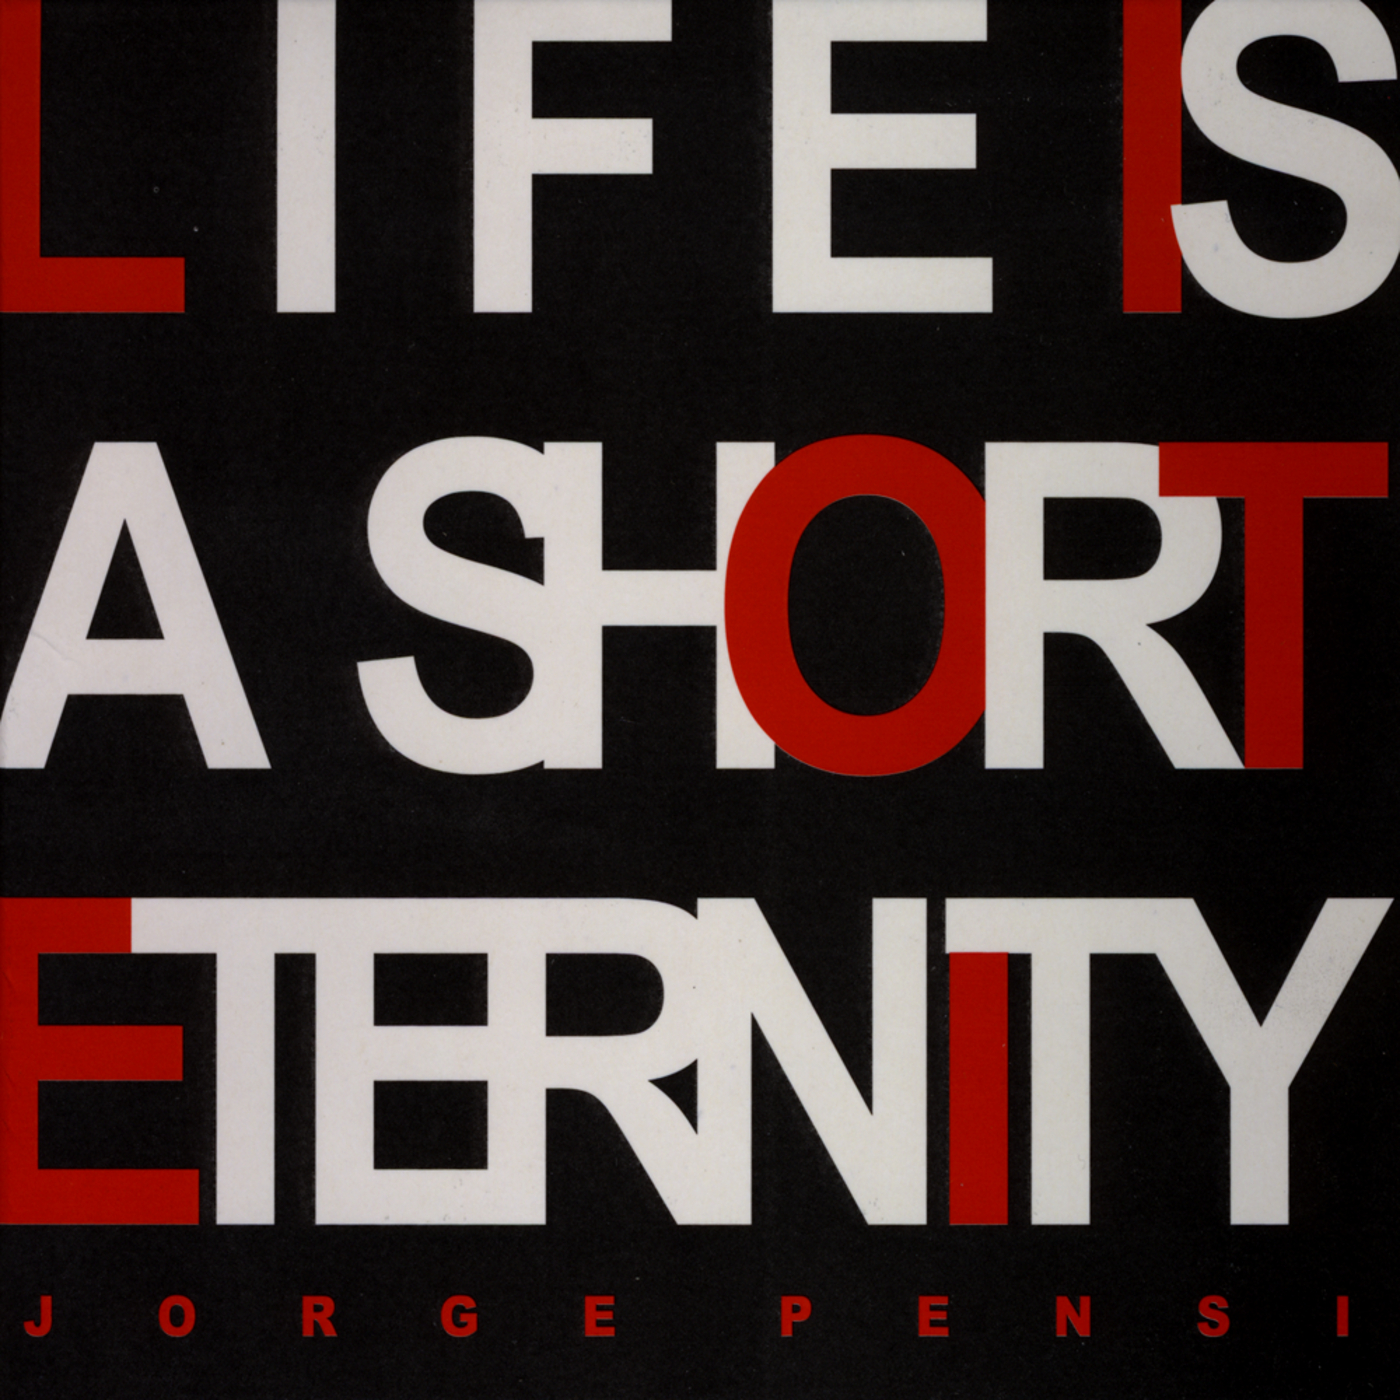 Life Is a Short Eternity